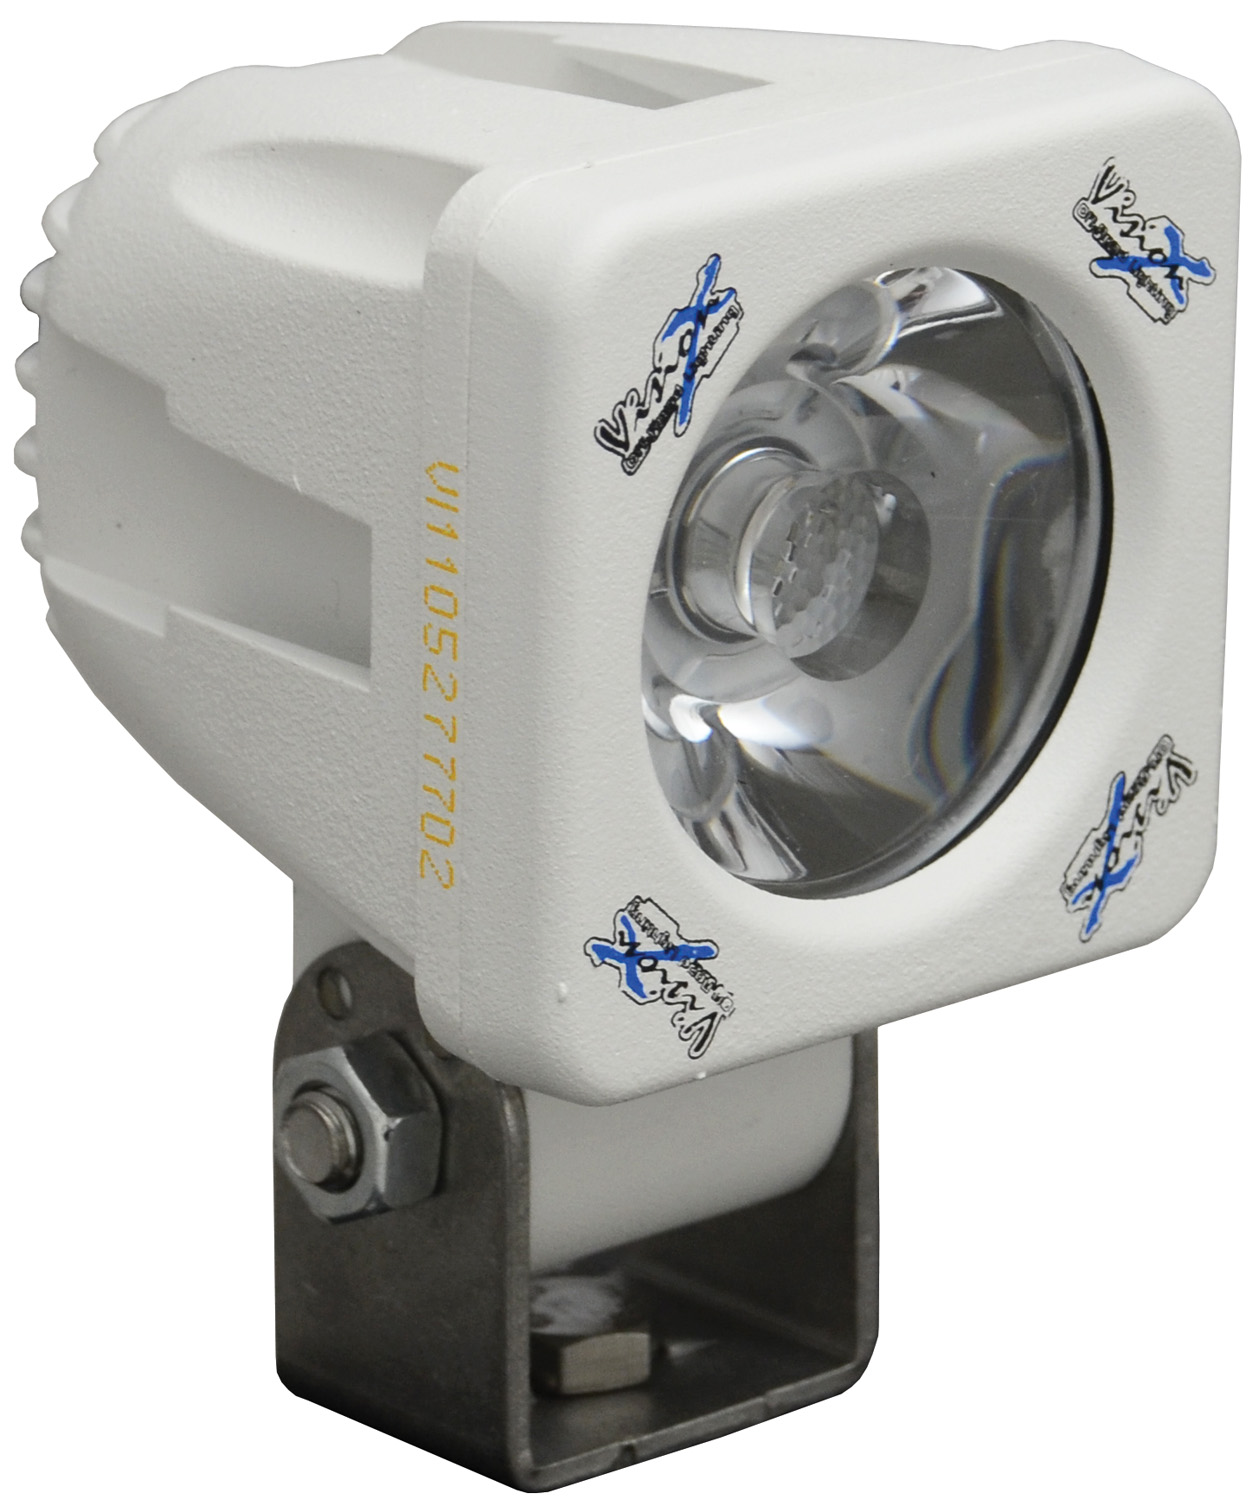 Vision X 2 inch SOLSTICE SOLO WHITE 10W LED 10° NARROW